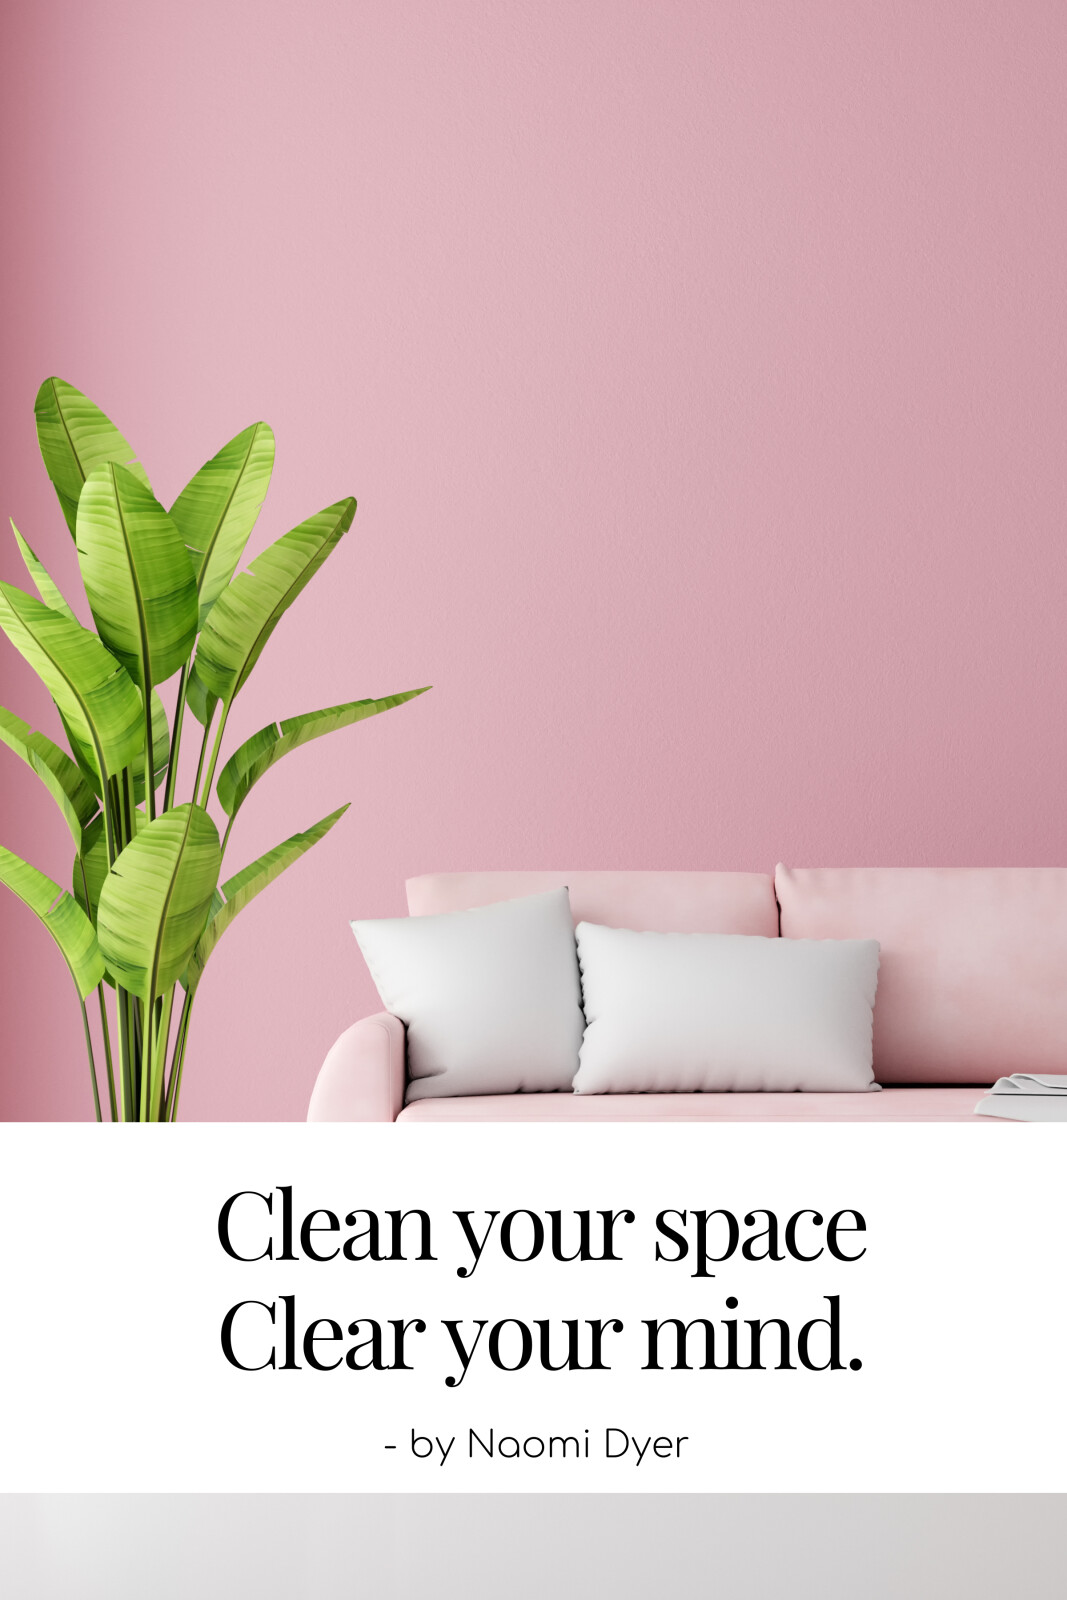 Clean your space - Clear your mind!